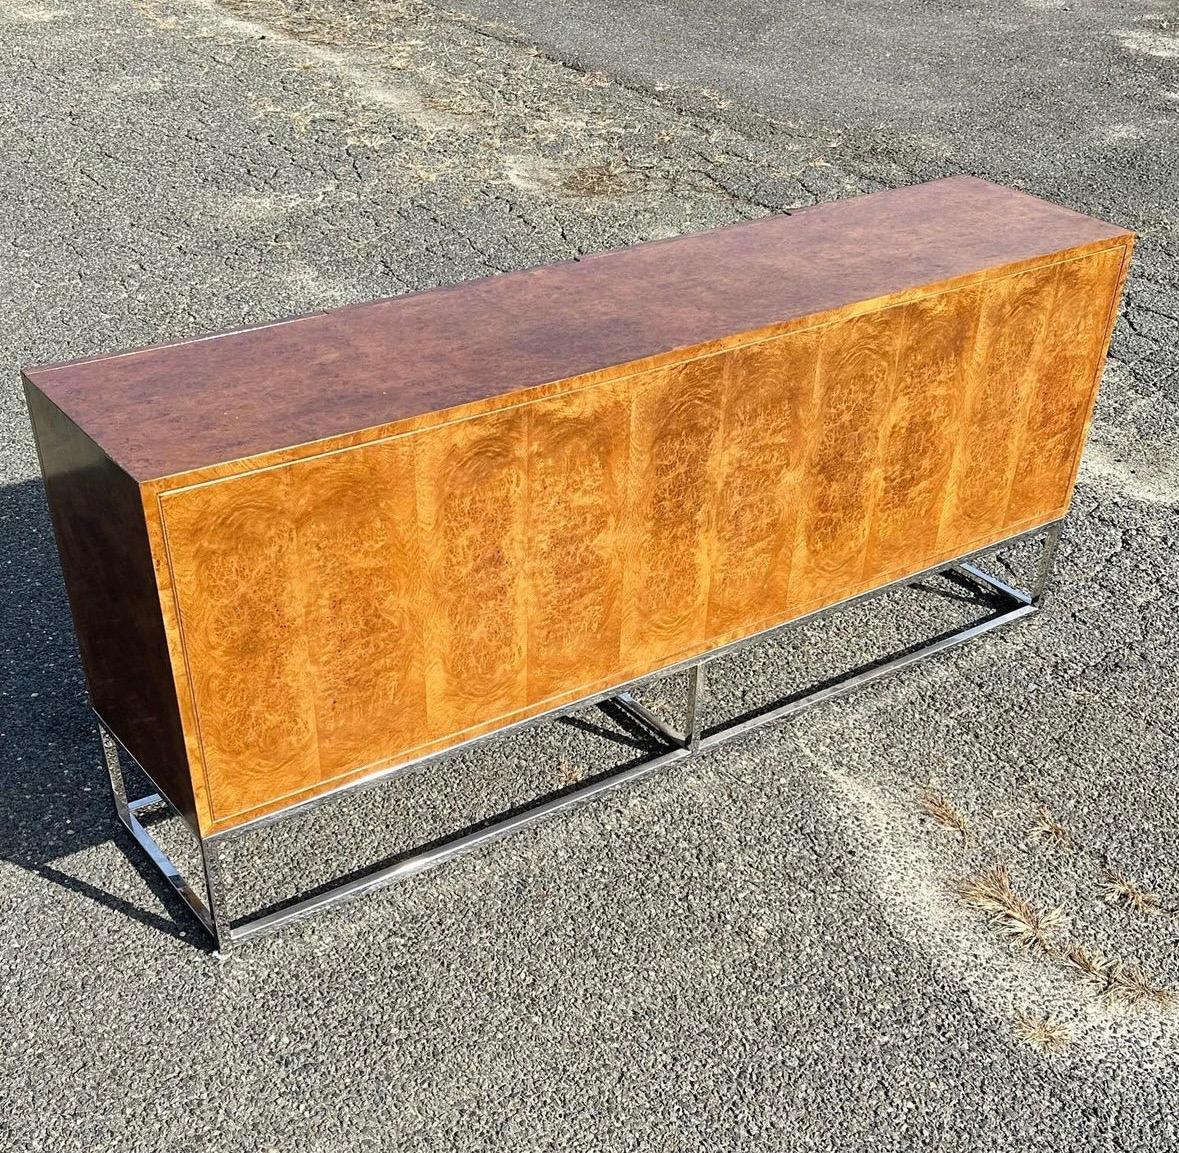 Extremely well cared for in its original factory finish. 

Cabinet is finished with Burl veneer on all sides, chrome is in perfect condition. No pitting or rust. 

No label present. Two adjustable shelves, one on each side.